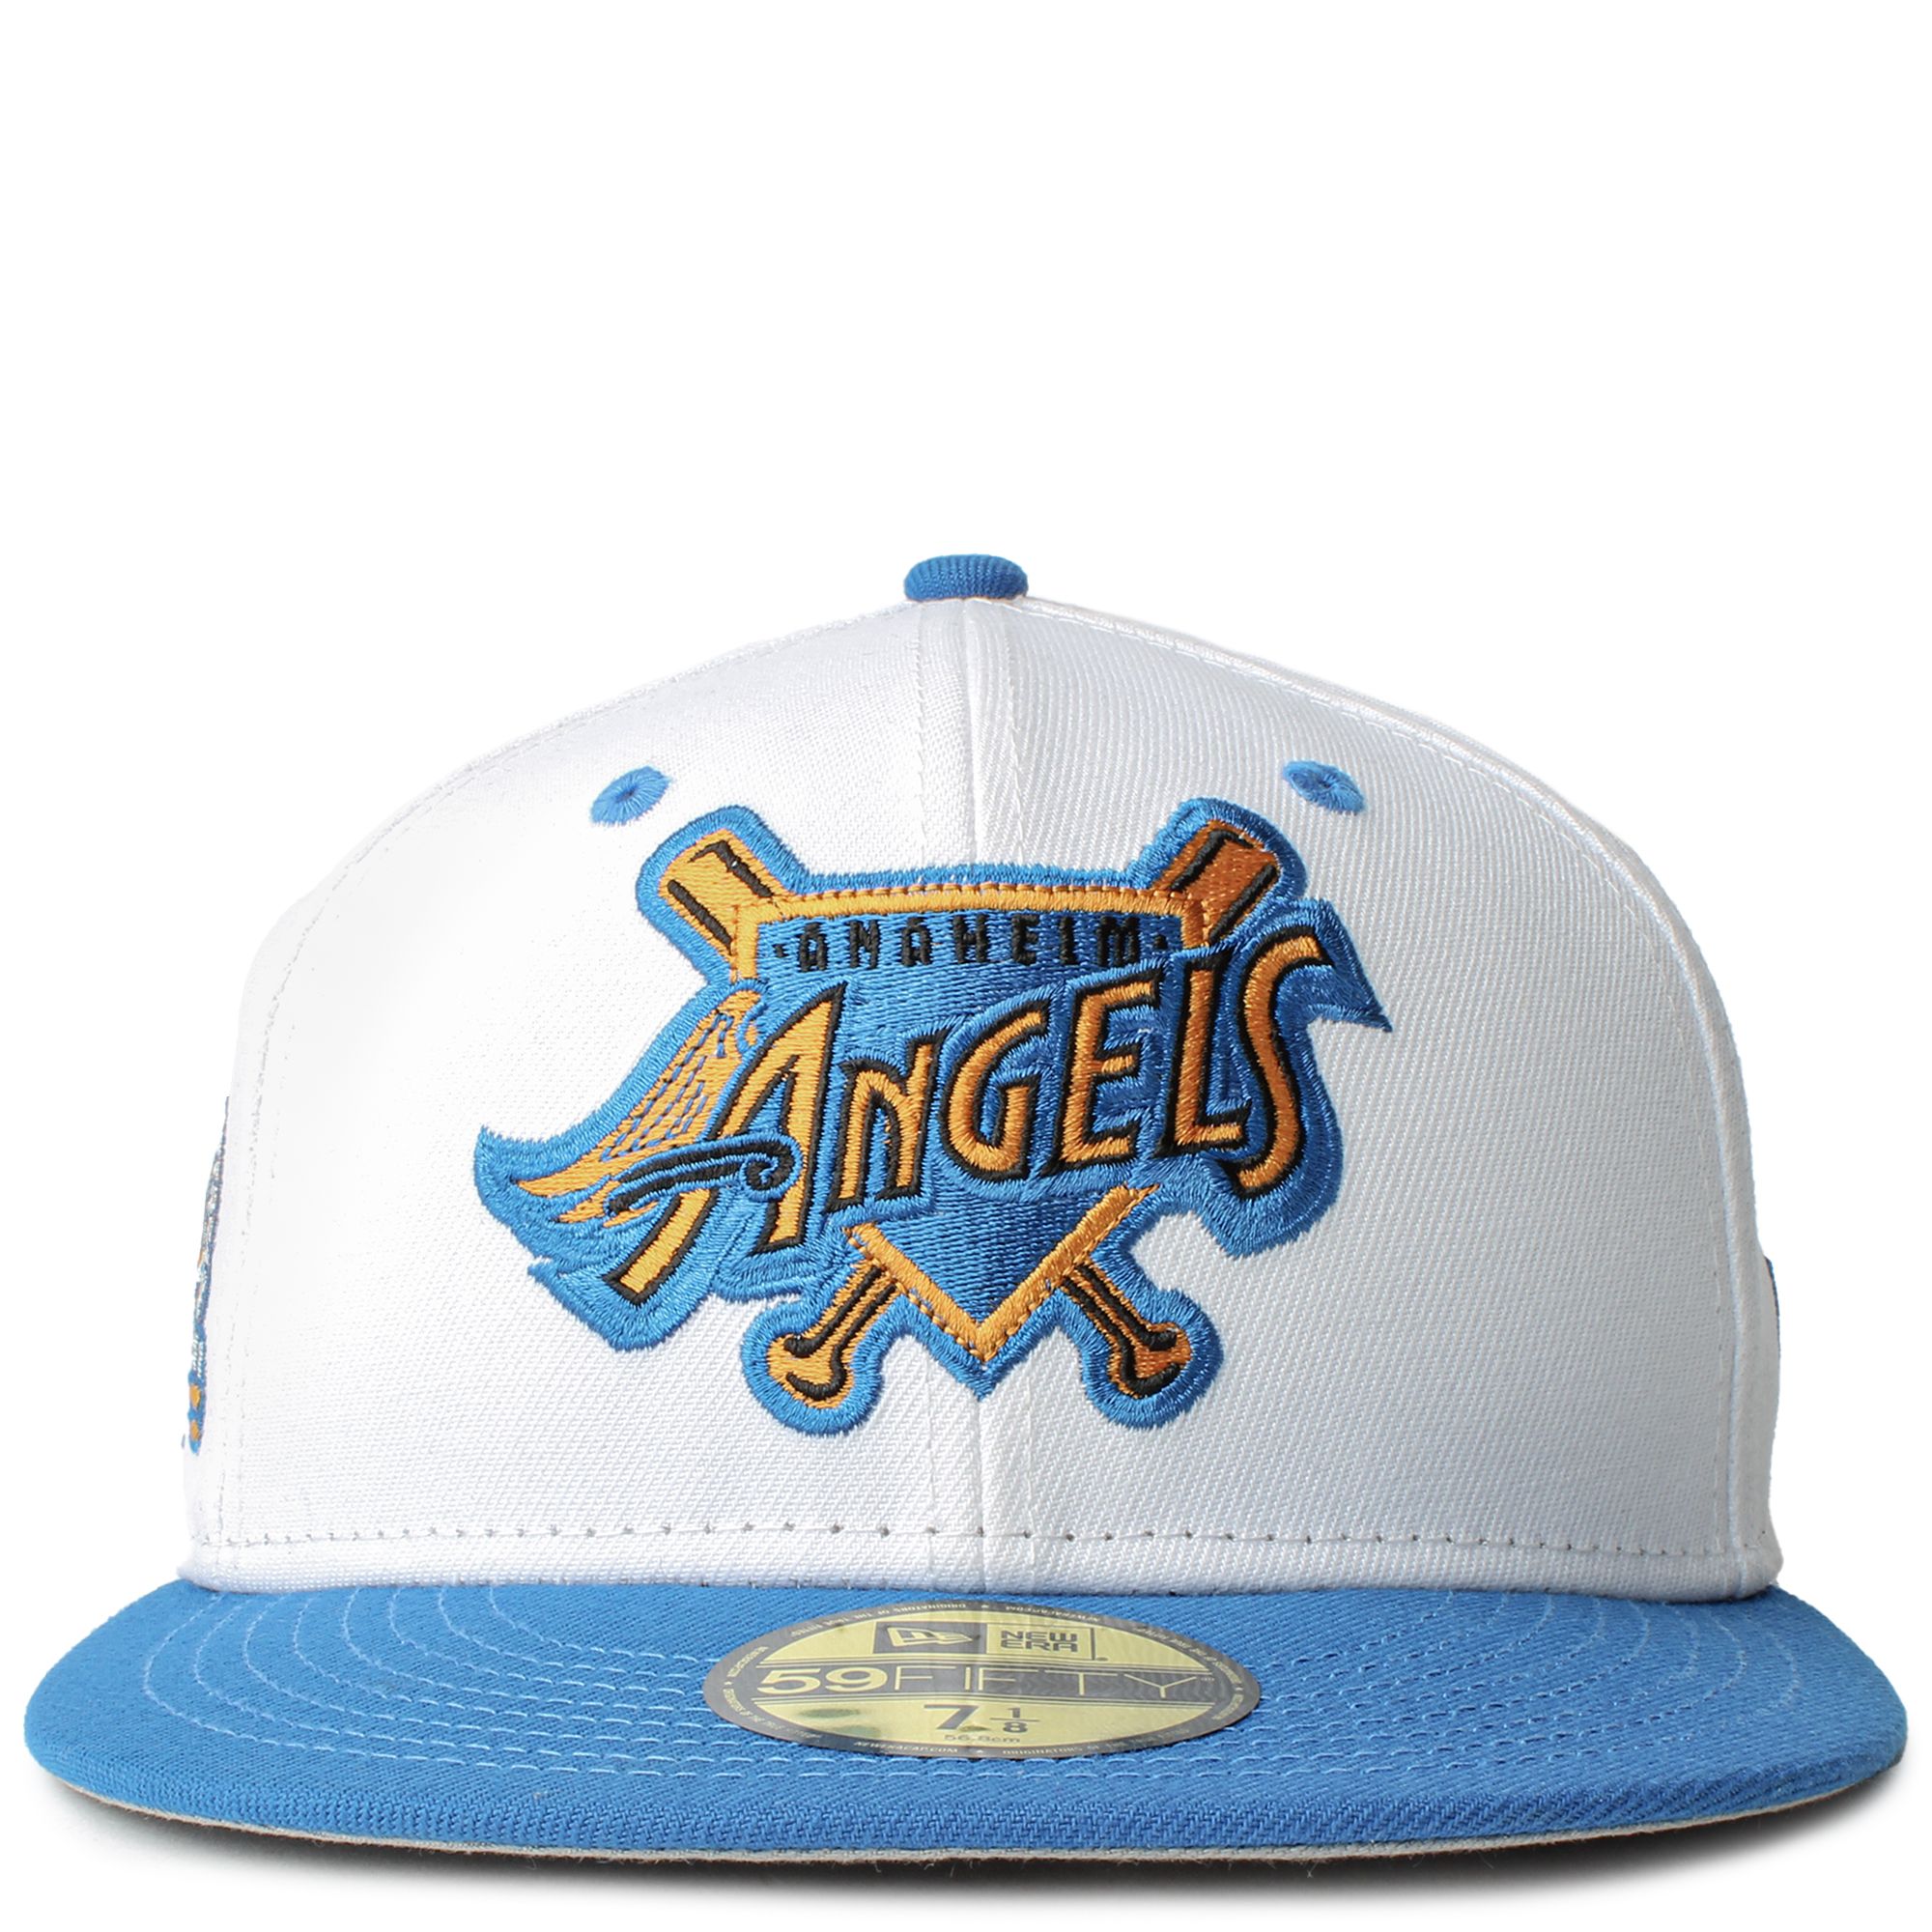 Los Angeles Angels New Era 5950 Fitted Hat - Black/White